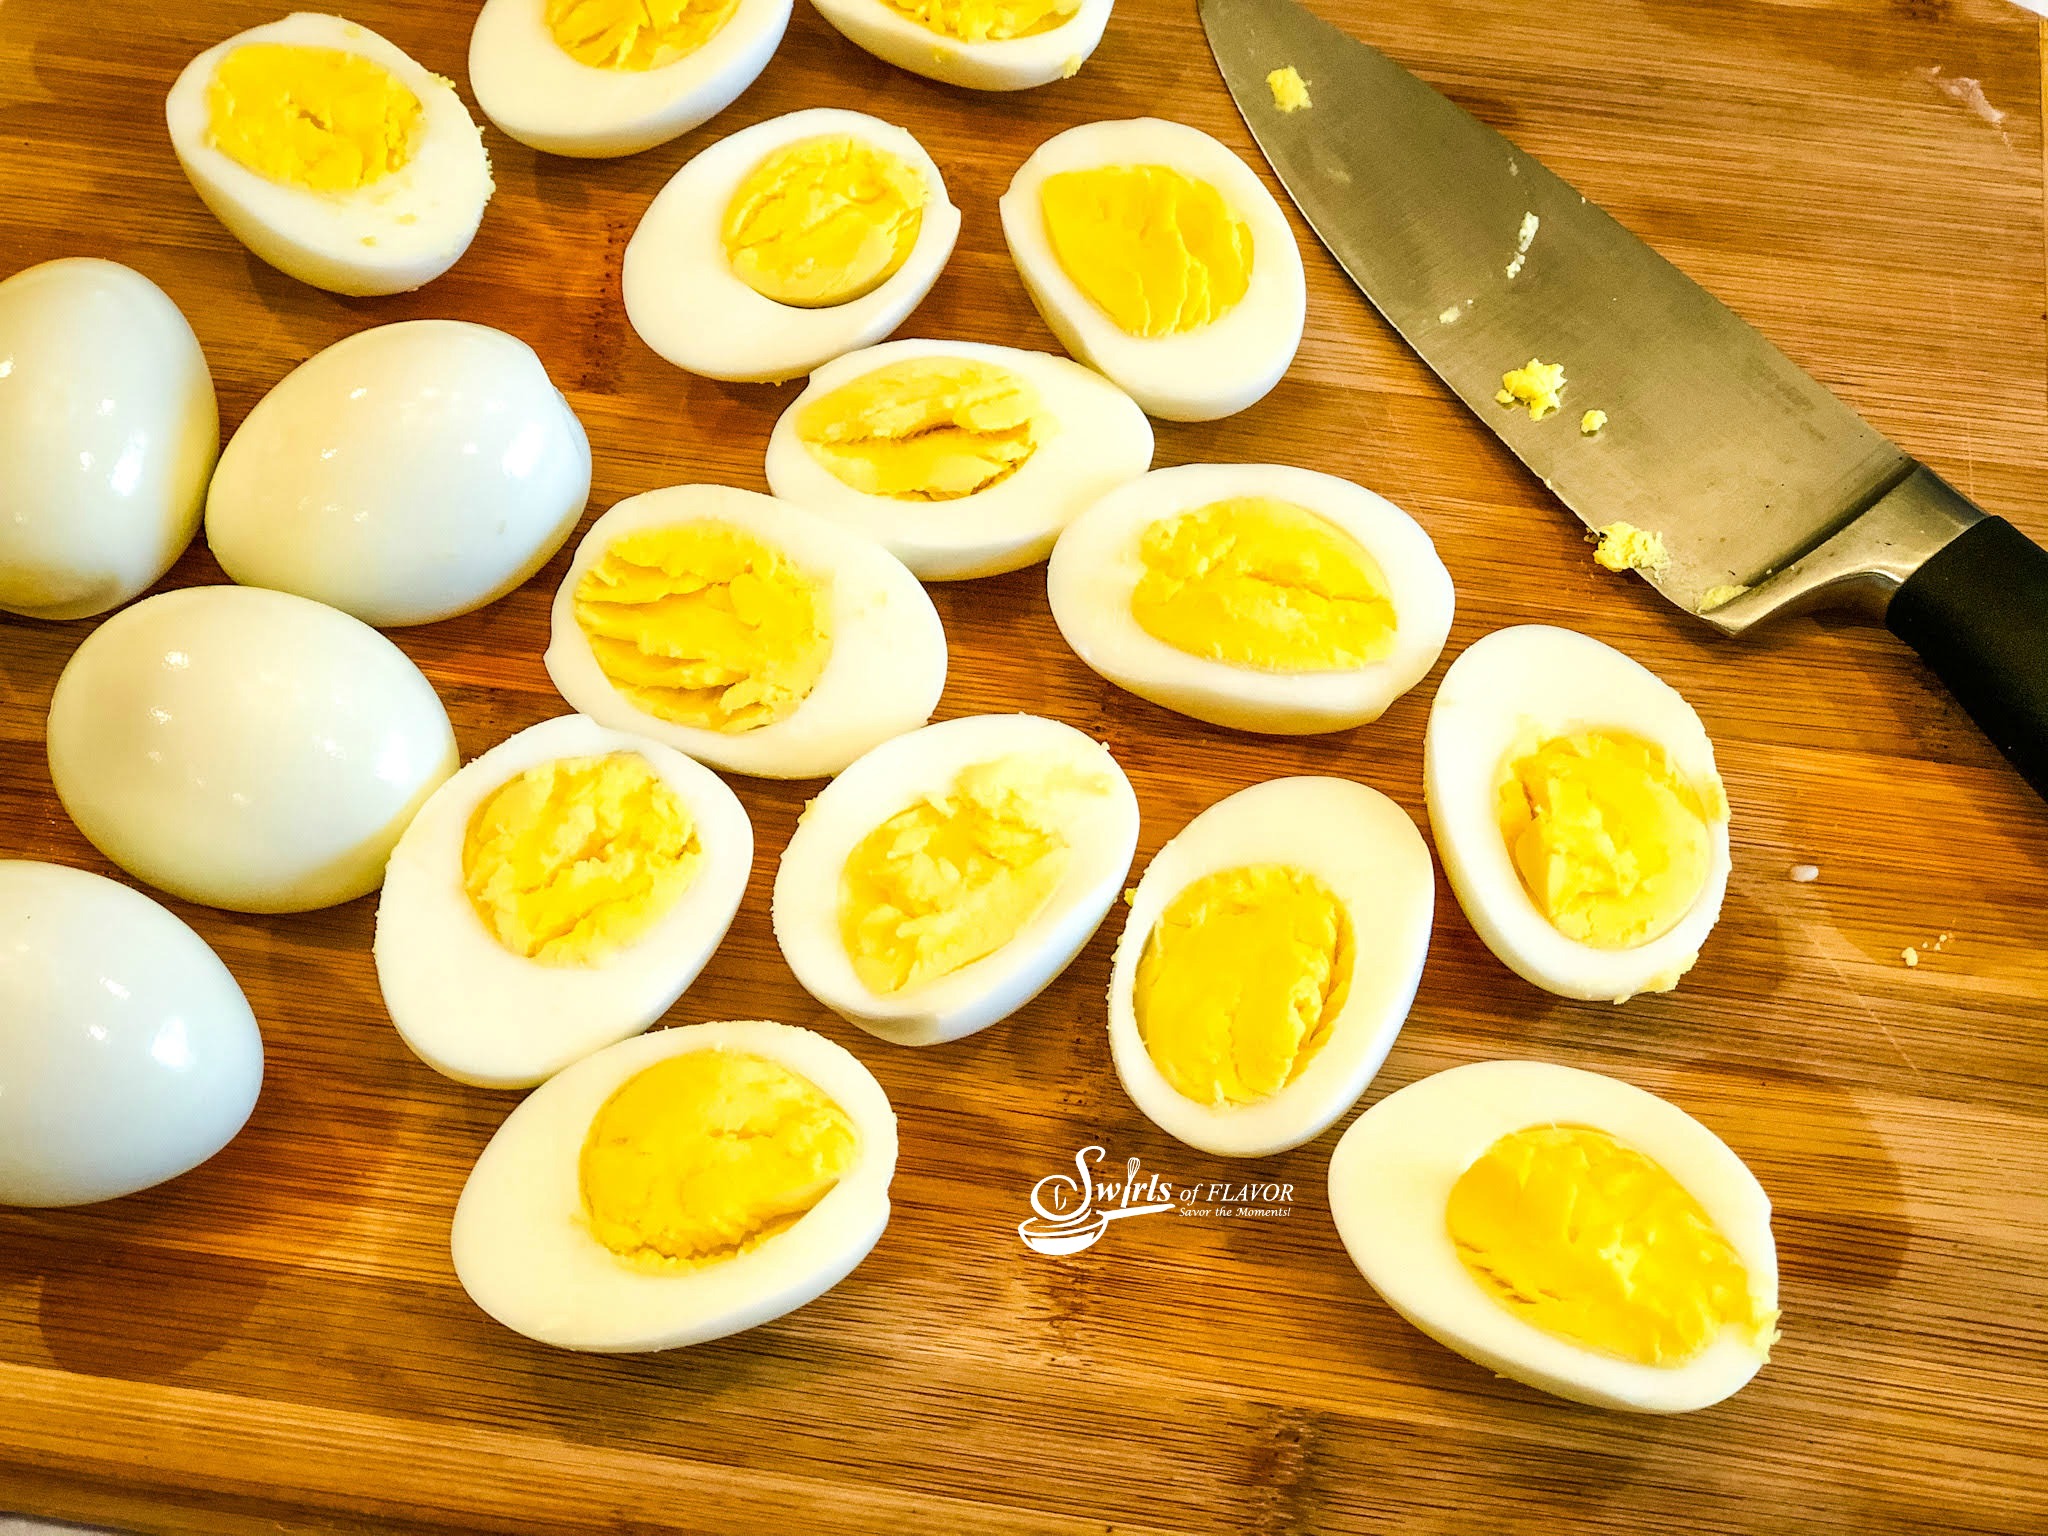 Hard boiled eggs on cutting board with knife